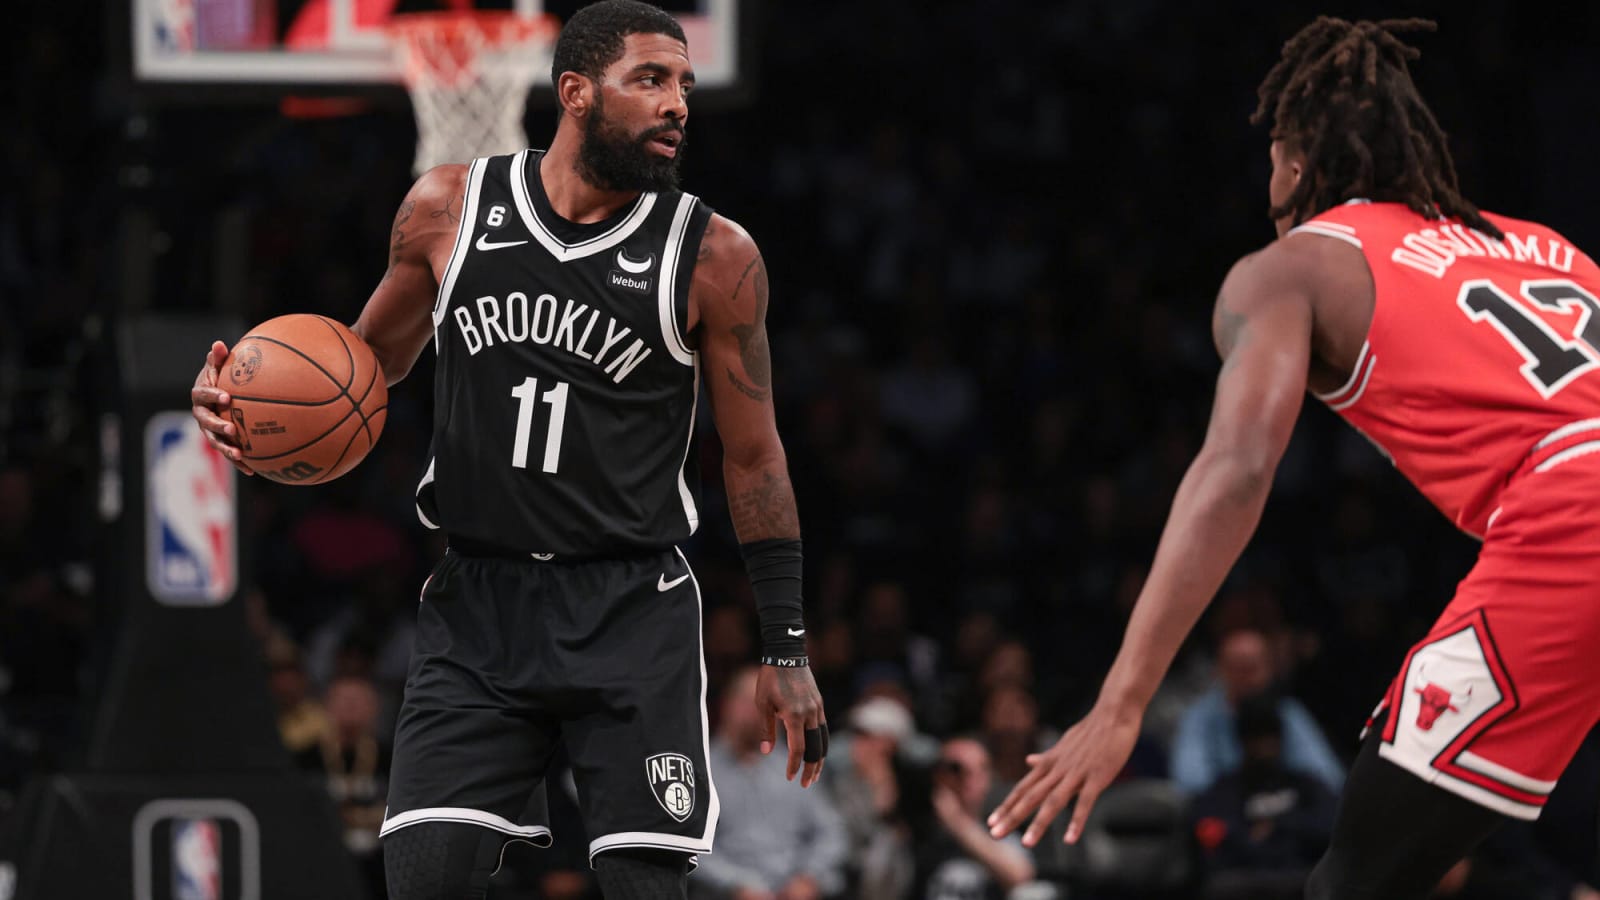 Nets Owner: Kyrie Irving ‘Still Has Work To Do’ Before Return